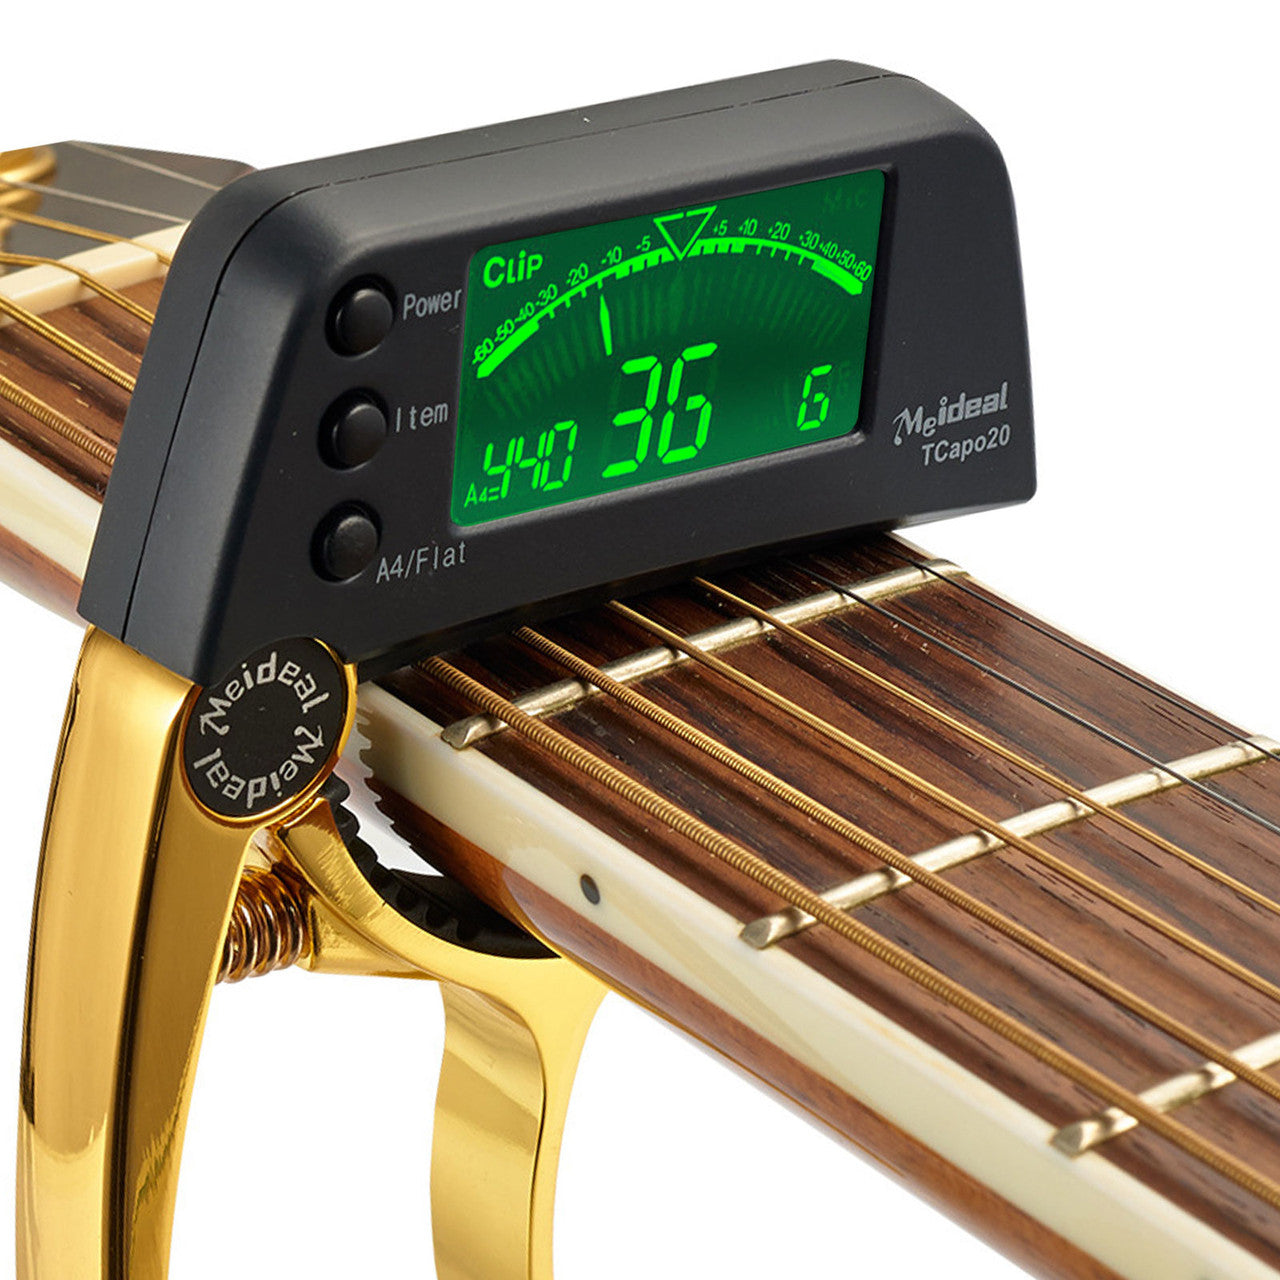 Guitar Tuner Clip-On LED Display Professional Tuner for All Instruments - Accurate Tuning Modes